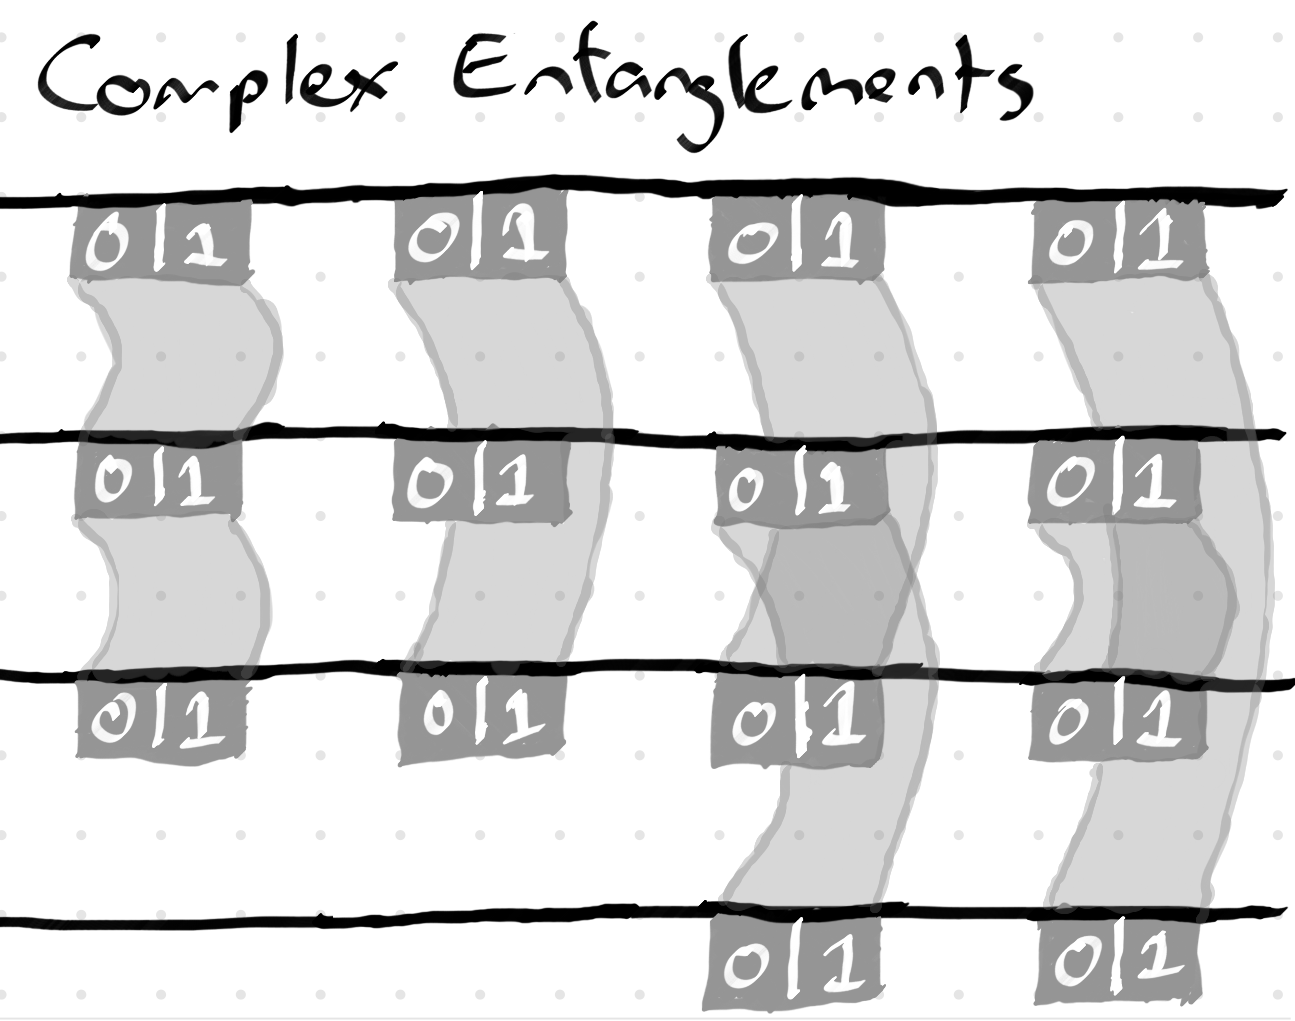 Complex entangled states